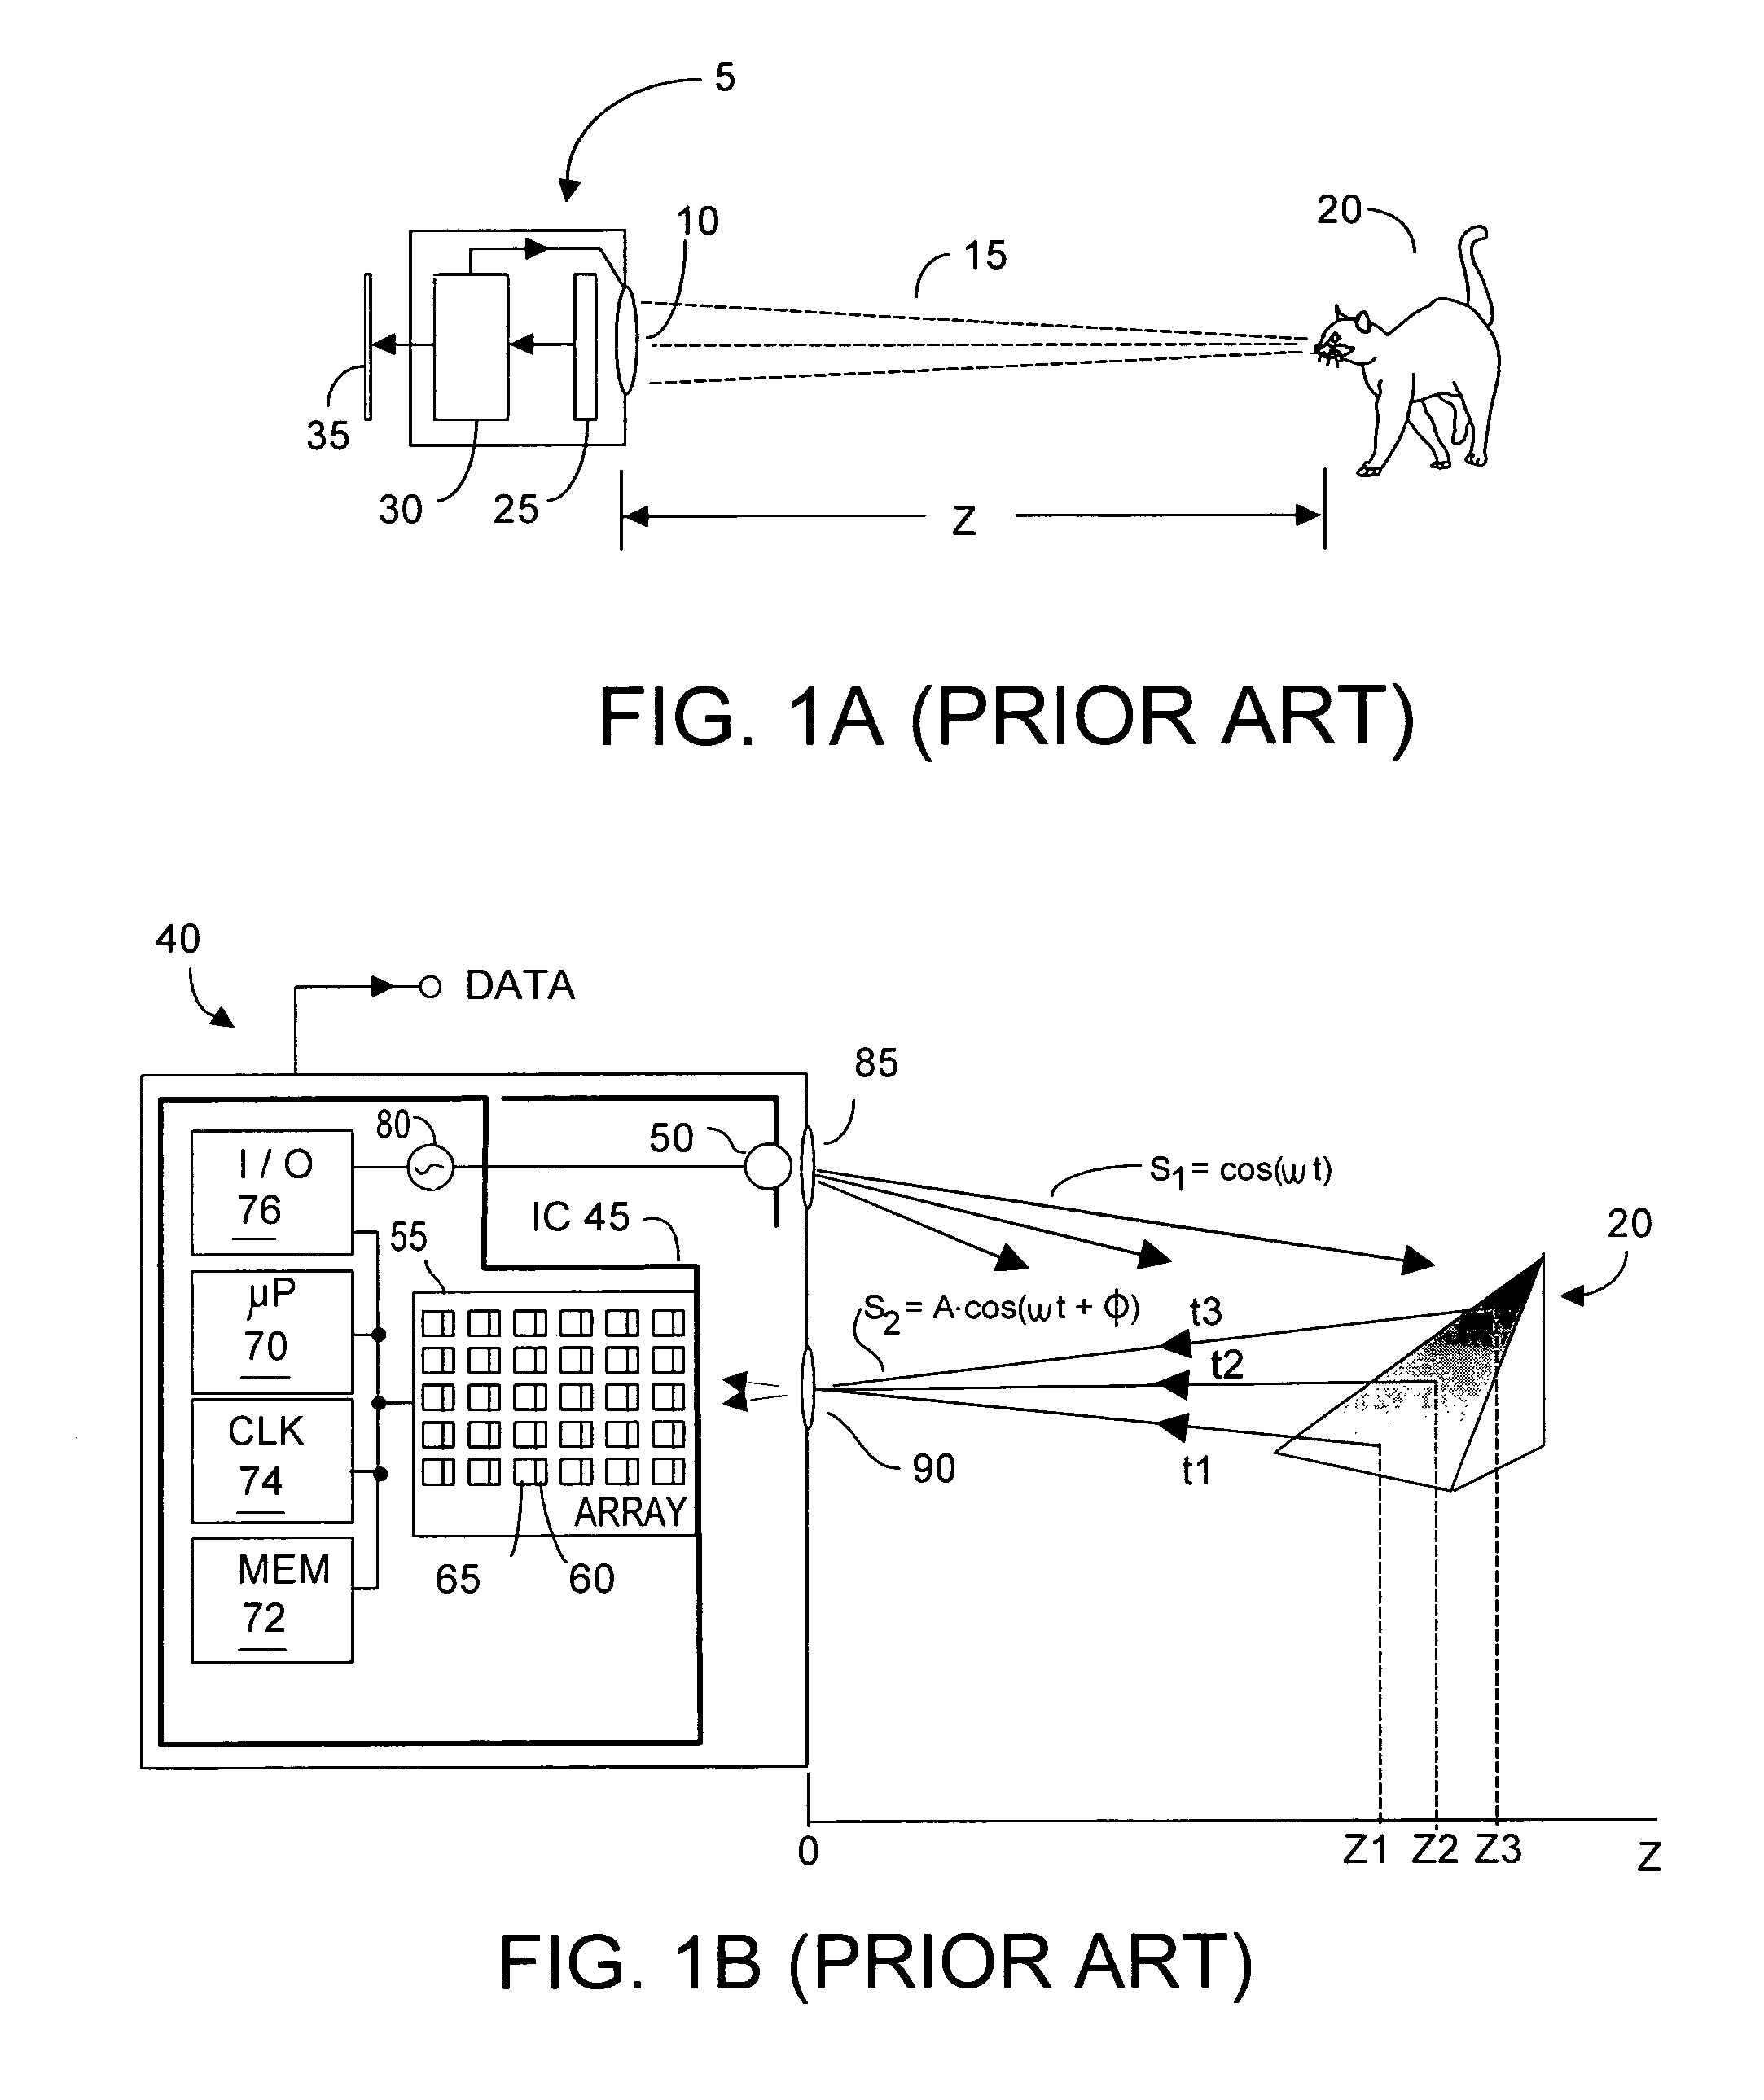 Method and system to increase X-Y resolution in a depth (Z) camera using red, blue, green (RGB) sensing